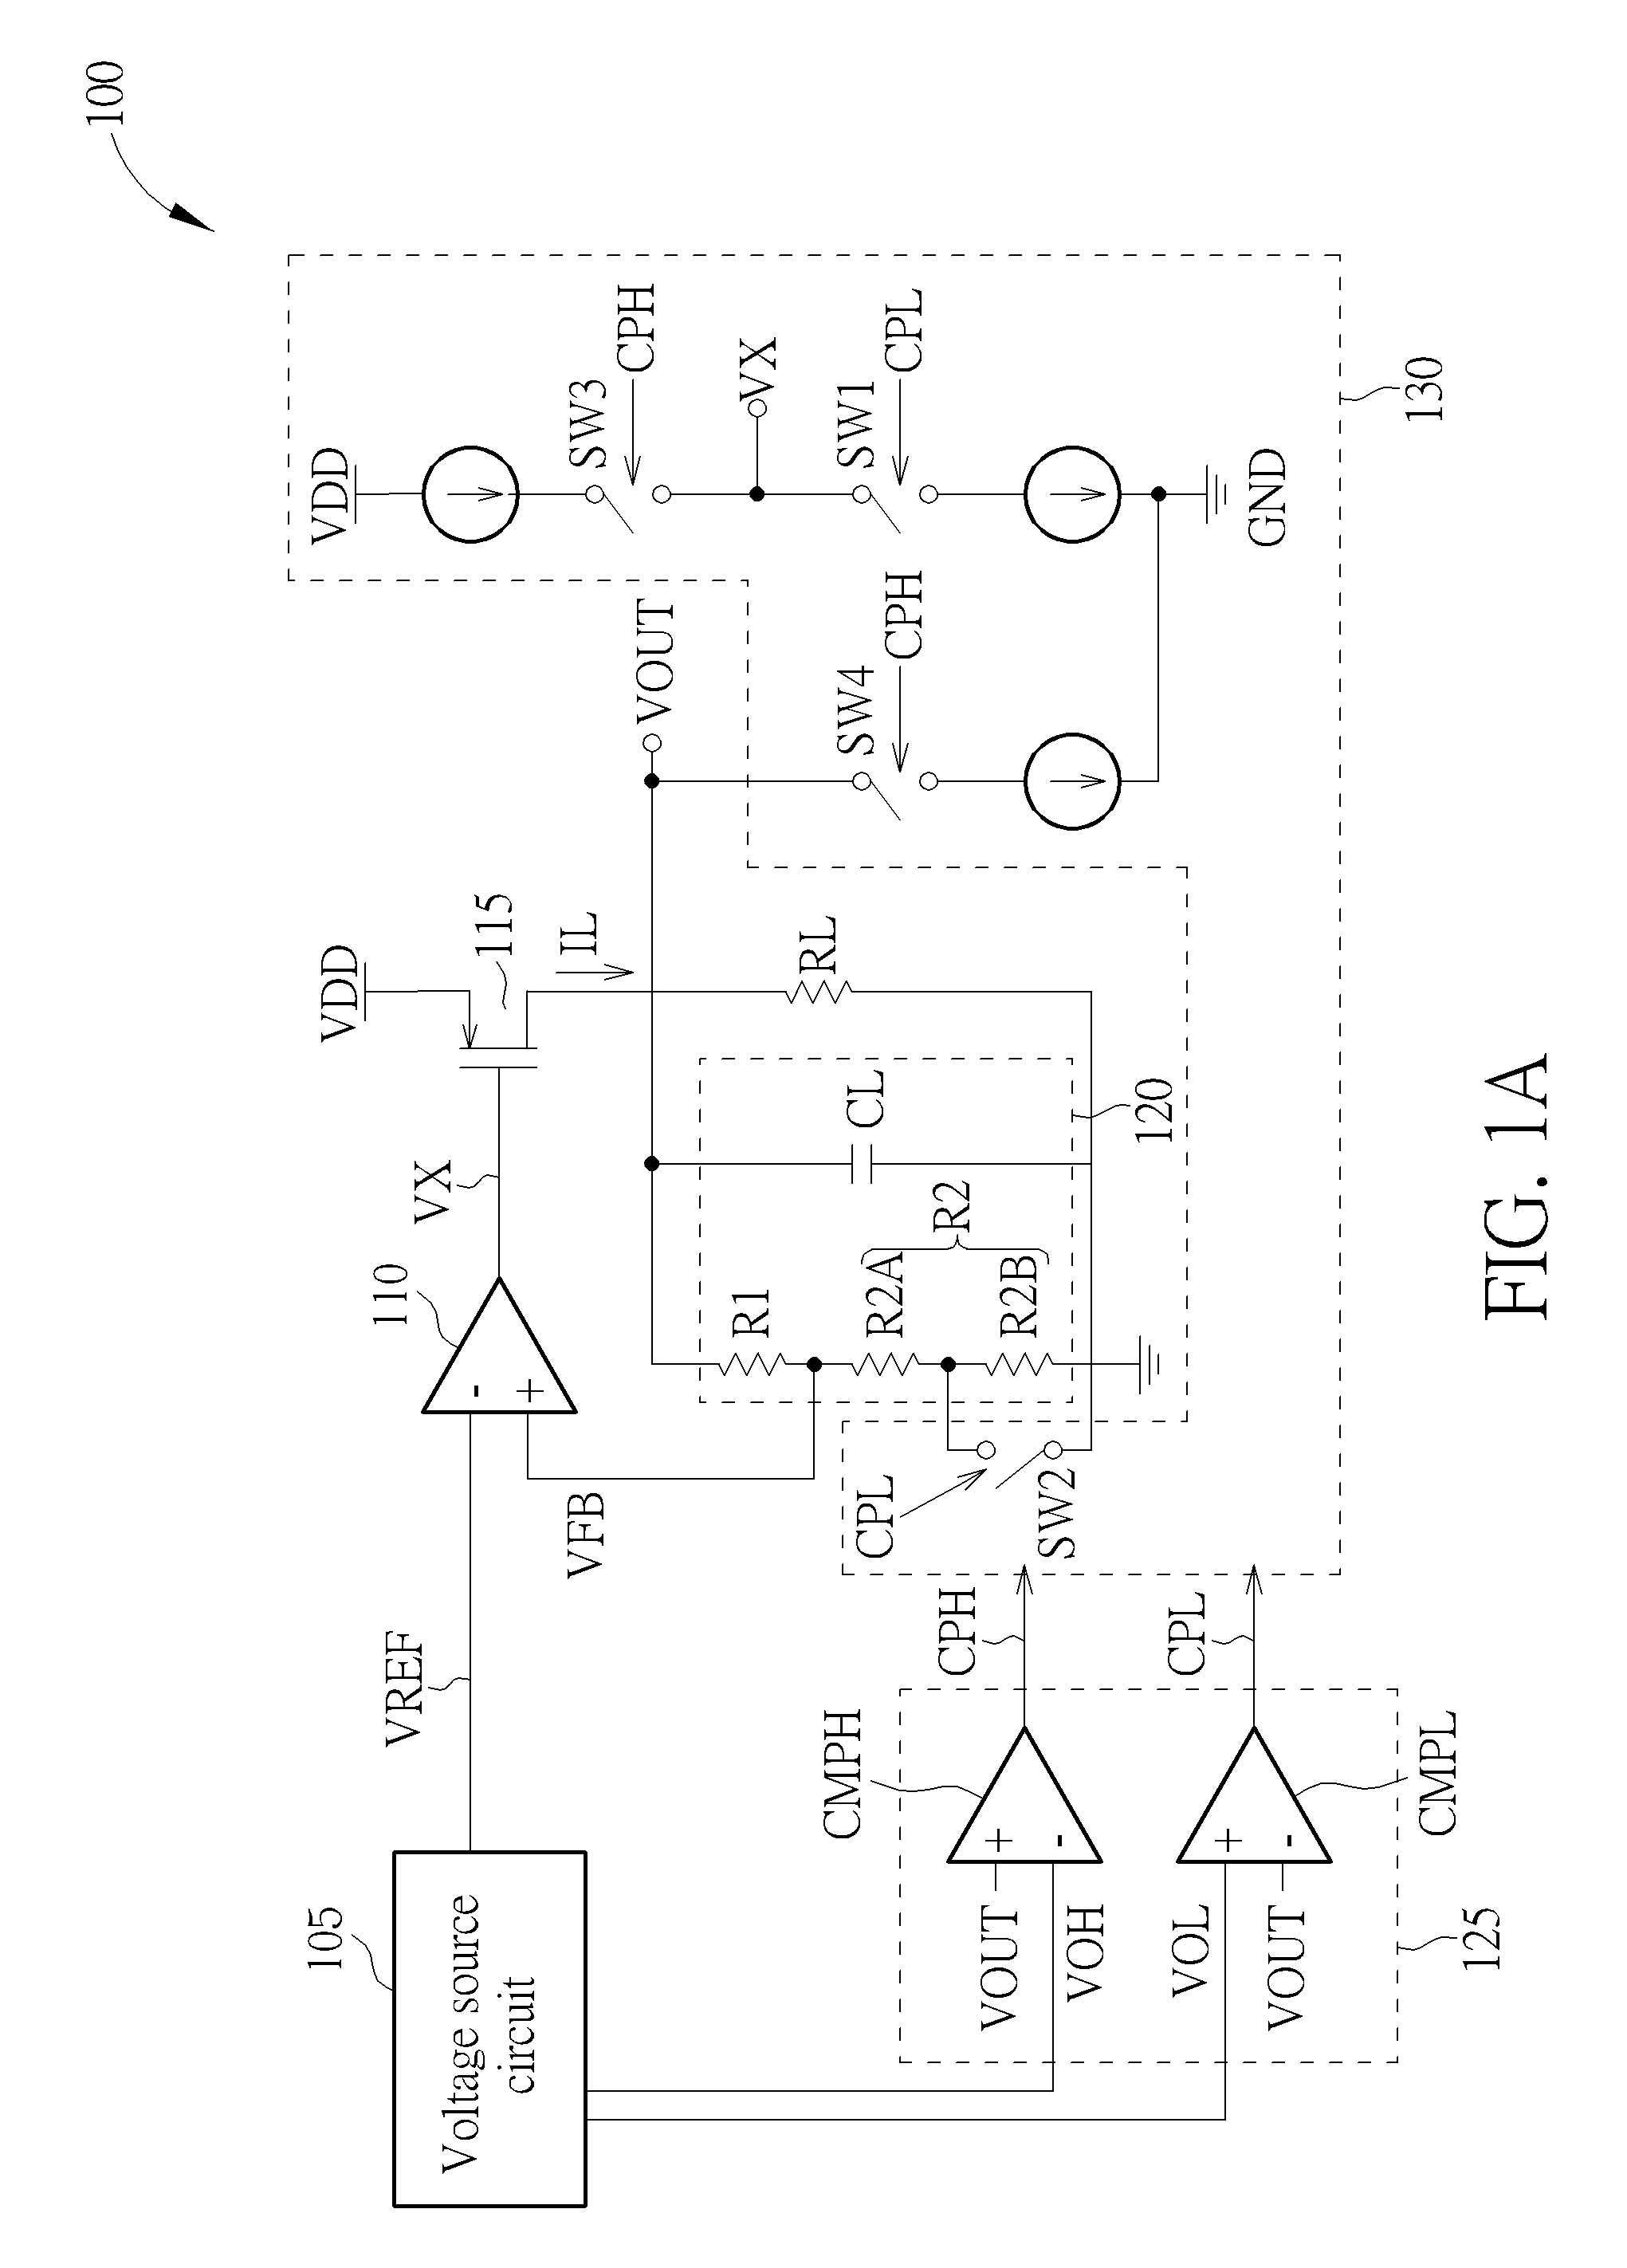 Low-dropout voltage regulator apparatus capable of adaptively adjusting current passing through output transistor to reduce transient response time and related method thereof